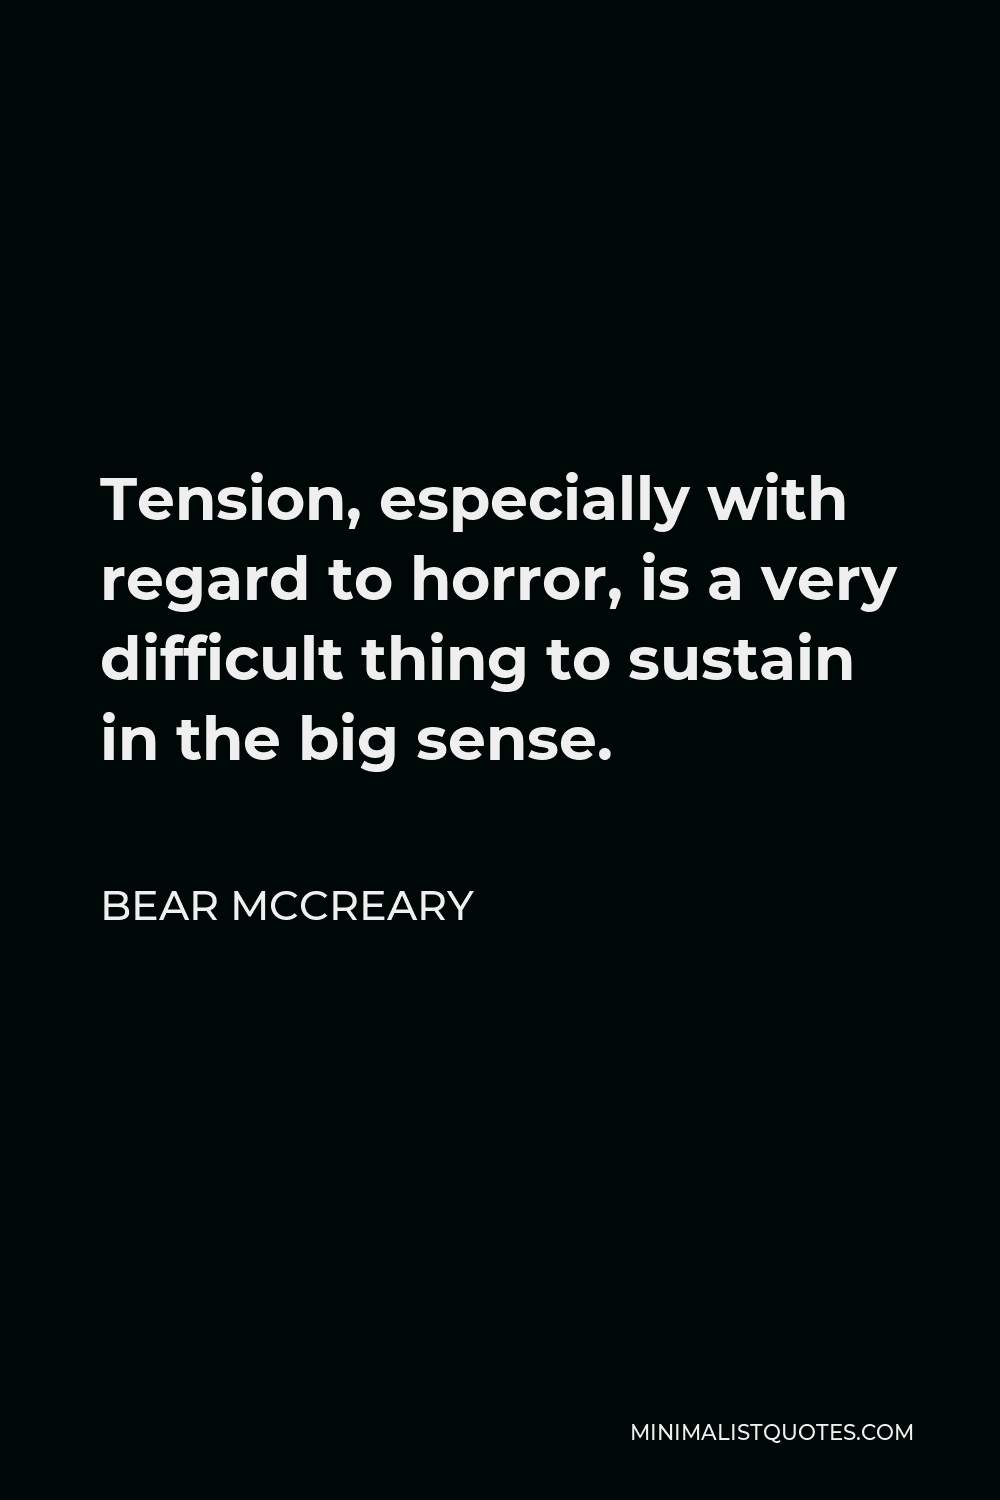 Bear McCreary Quote - Tension, especially with regard to horror, is a very difficult thing to sustain in the big sense.